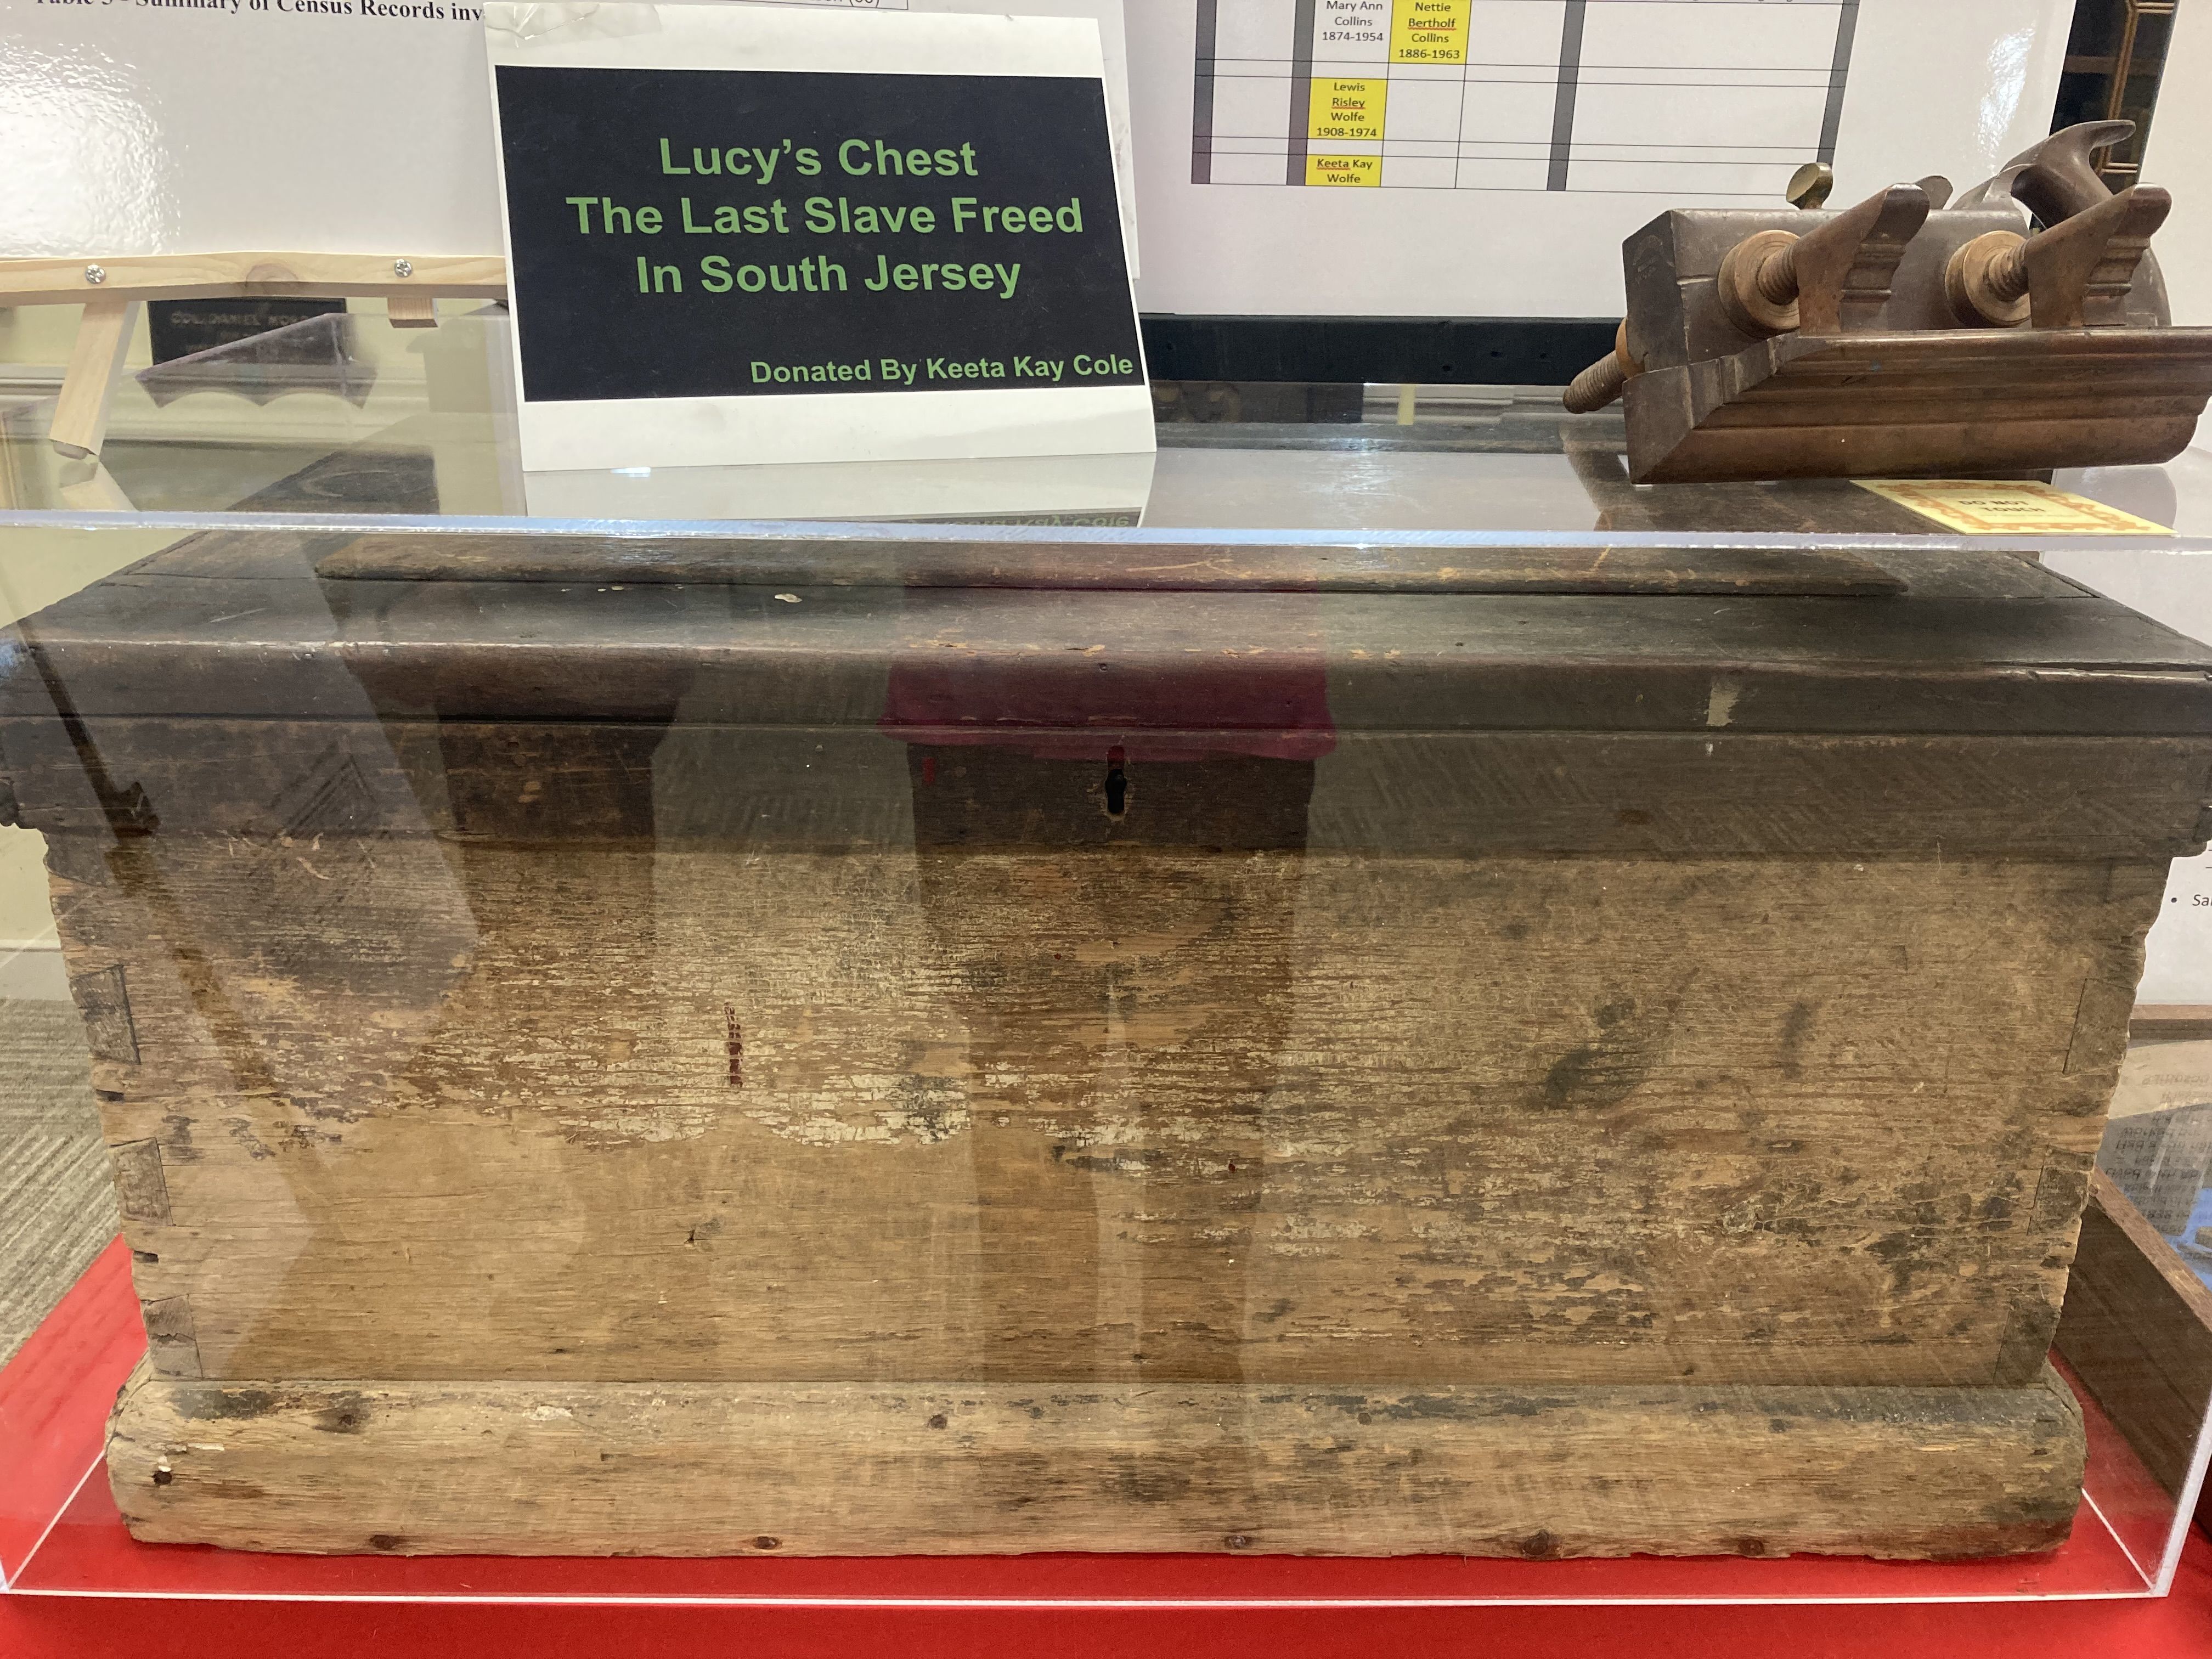 Photograph of old wooden box in a glass case.